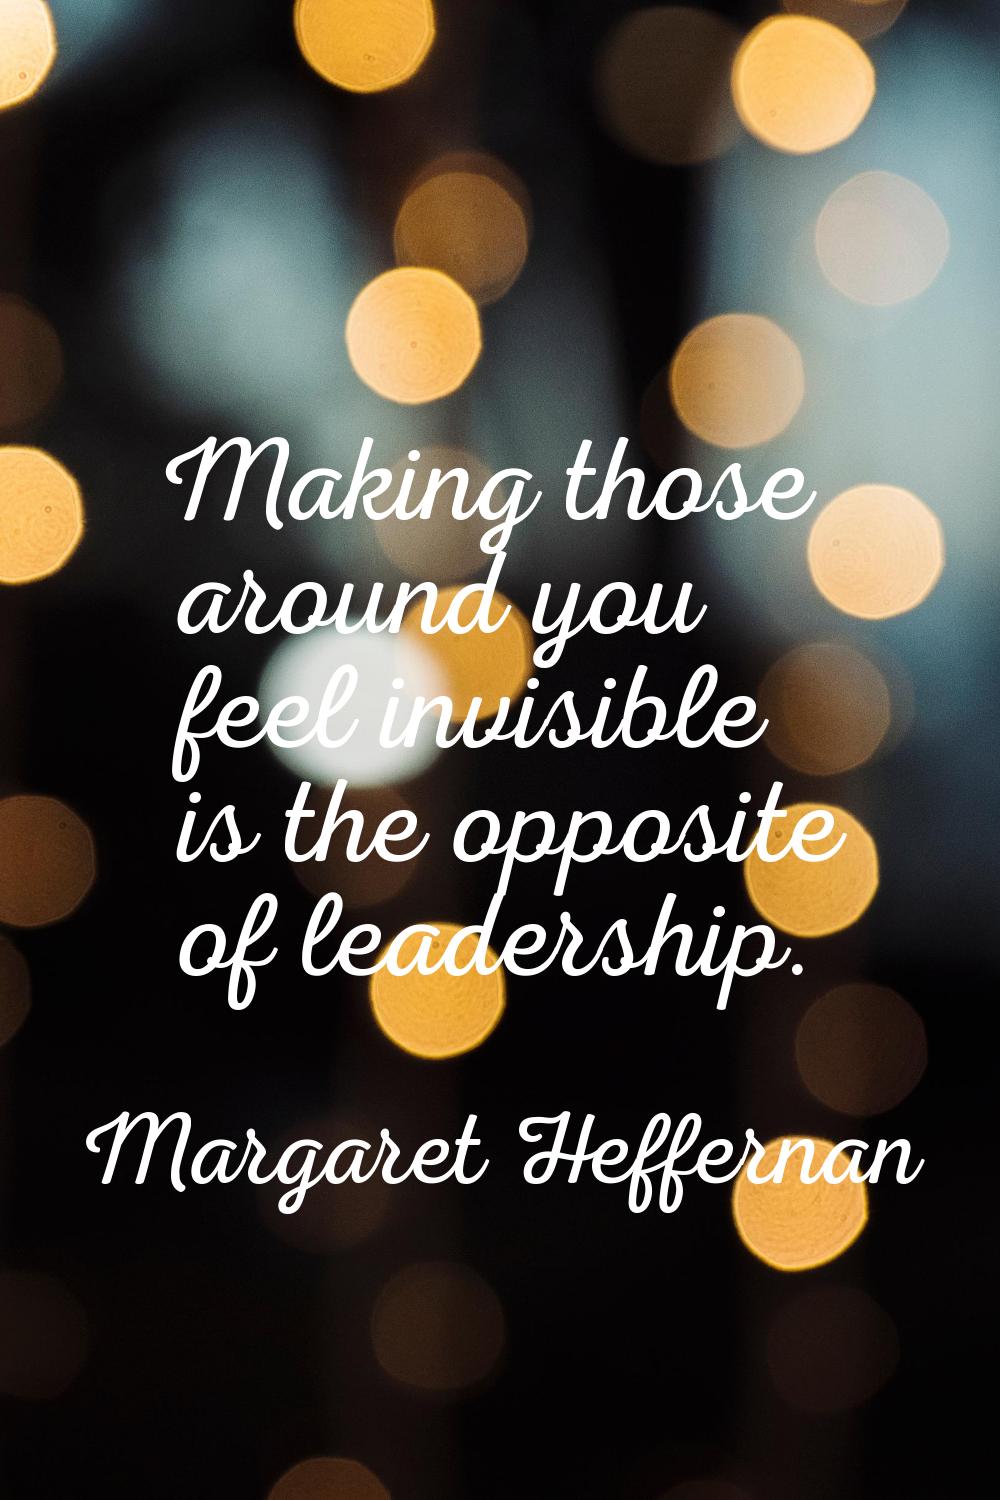 Making those around you feel invisible is the opposite of leadership.